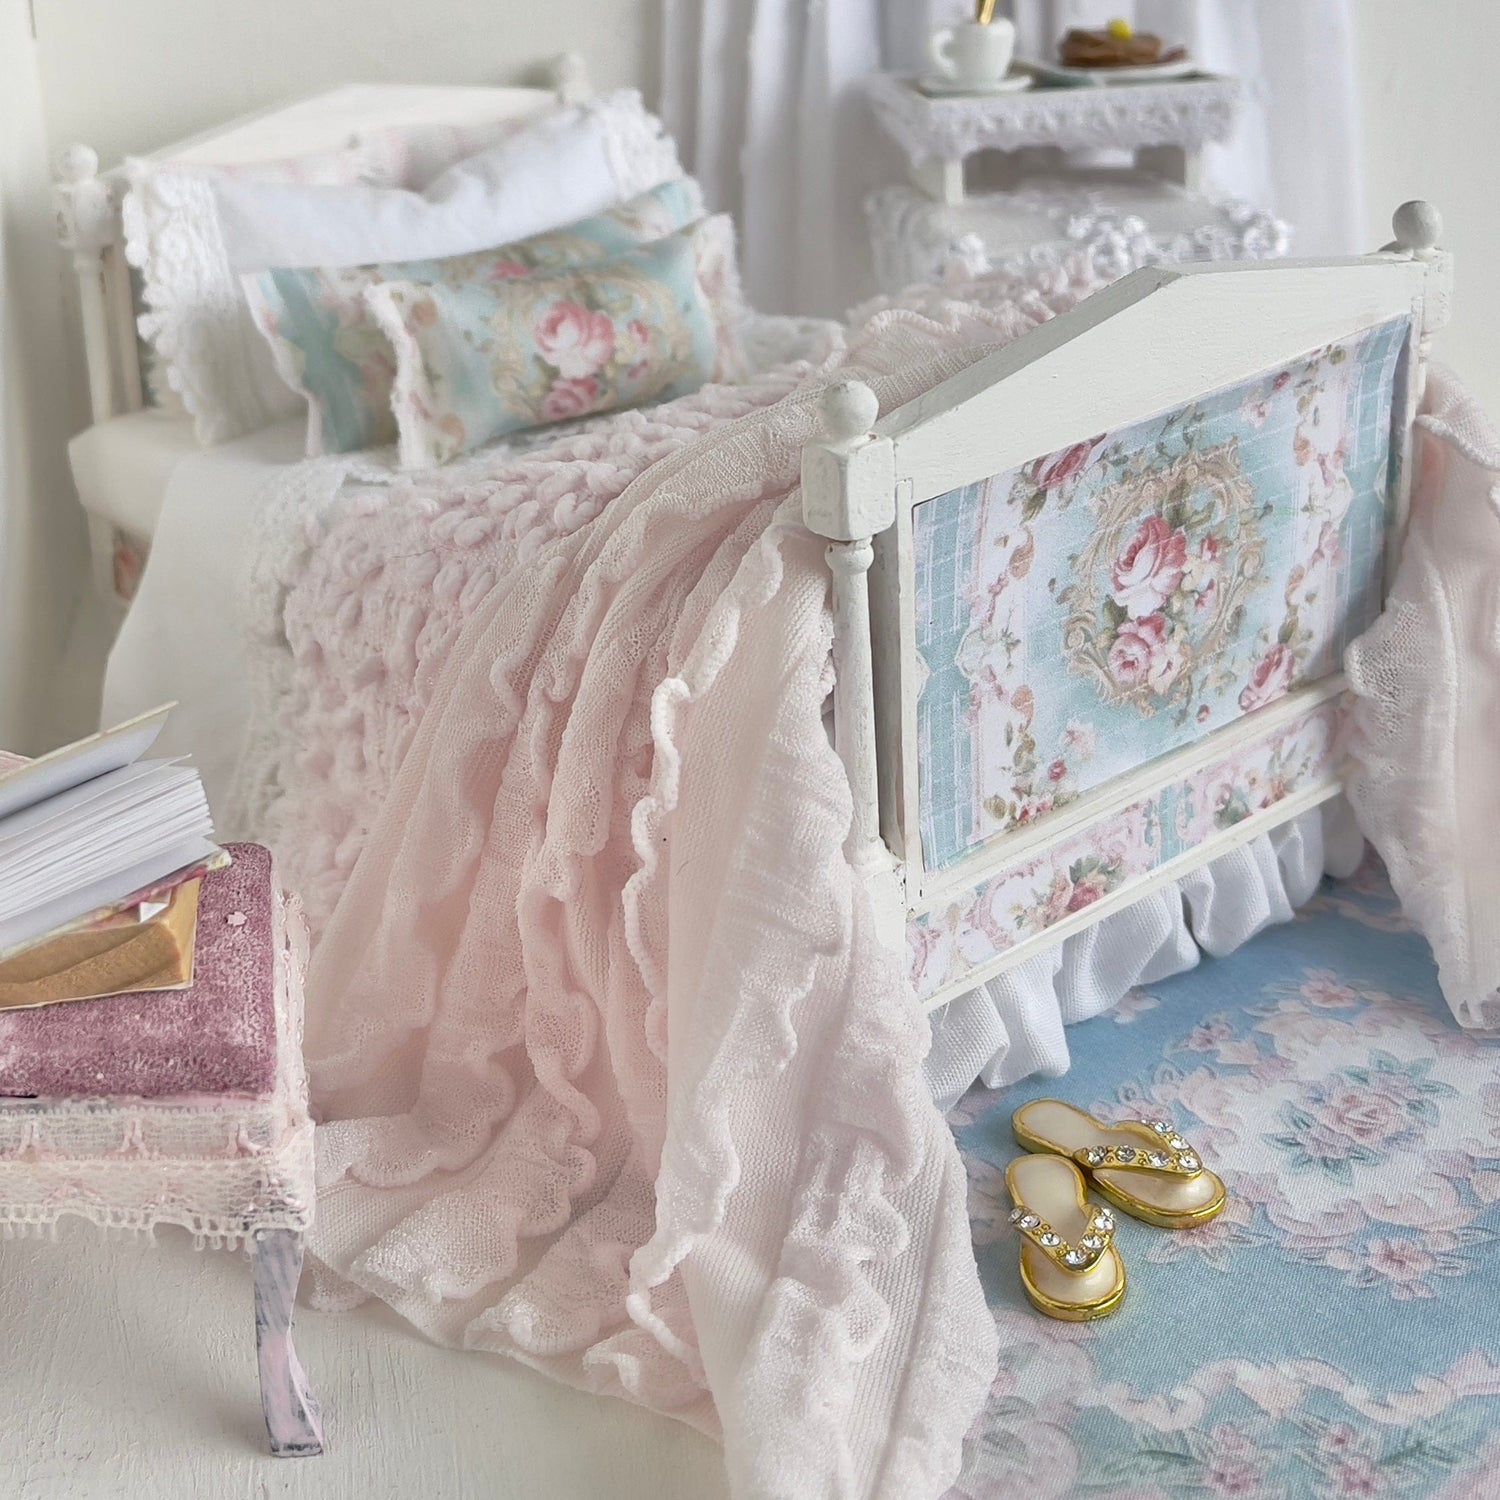 Chantallena Doll House (Copy) Dressed Bed | Sold Decoupage Shabby Pink Wildflowers Wooden Bed with Lace Accents